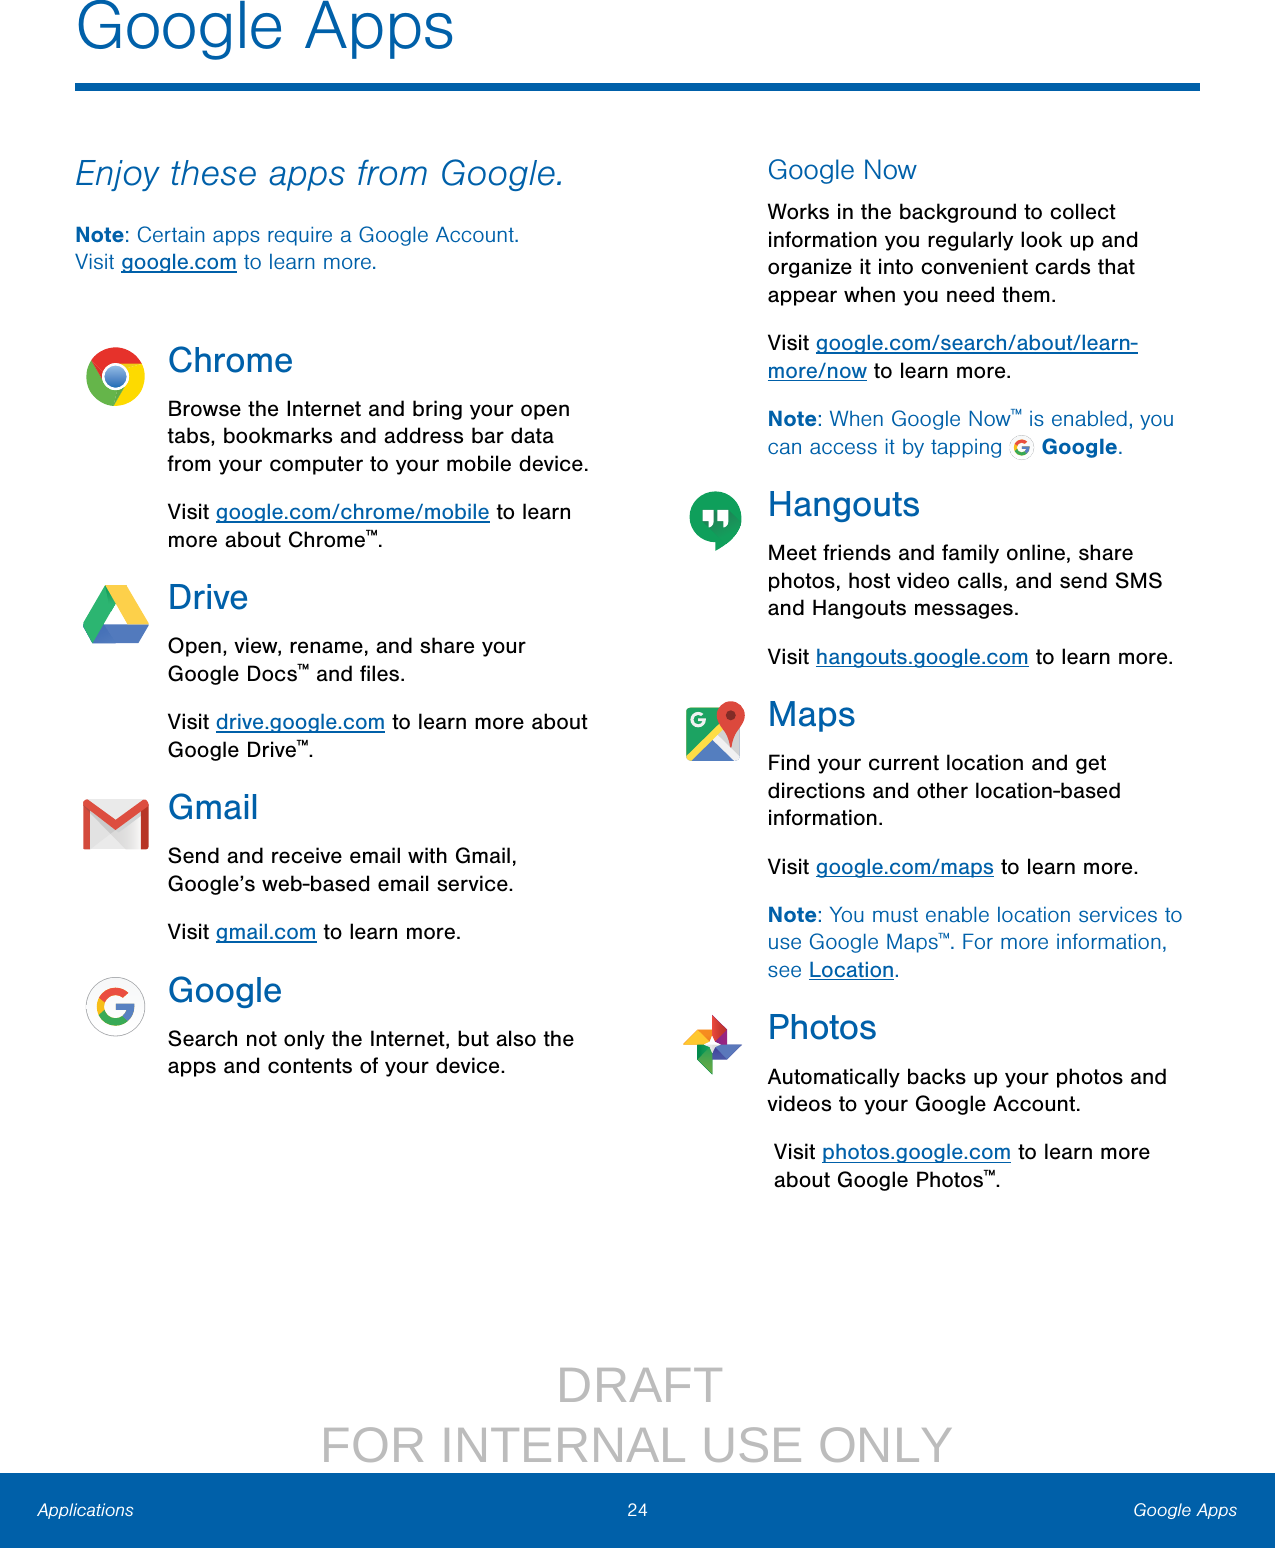                  DRAFT FOR INTERNAL USE ONLY24 Google AppsApplicationsEnjoy these apps from Google.Note: Certain apps require a Google Account. Visitgoogle.com to learn more.ChromeBrowse the Internet and bring your open tabs, bookmarks and address bar data from your computer to your mobile device.Visit google.com/chrome/mobile to learn more about Chrome™.DriveOpen, view, rename, and share your Google Docs™ and ﬁles.Visit drive.google.com to learn more about Google Drive™.GmailSend and receive email with Gmail, Google’s web‑based email service.Visit gmail.com to learn more.GoogleSearch not only the Internet, but also the apps and contents of your device.Google NowWorks in the background to collect information you regularly look up and organize it into convenient cards that appear when you need them.Visit google.com/search/about/learn‑more/now to learn more.Note: When Google Now™ is enabled, you can access it by tapping   Google.HangoutsMeet friends and family online, share photos, host video calls, and send SMS and Hangouts messages.Visit hangouts.google.com to learn more.MapsFind your current location and get directions and other location‑based information.Visit google.com/maps to learn more.Note: You must enable location services to use Google Maps™. For more information, seeLocation.PhotosAutomatically backs up your photos and videos to your Google Account.Visit photos.google.com to learn more about Google Photos™.Google Apps